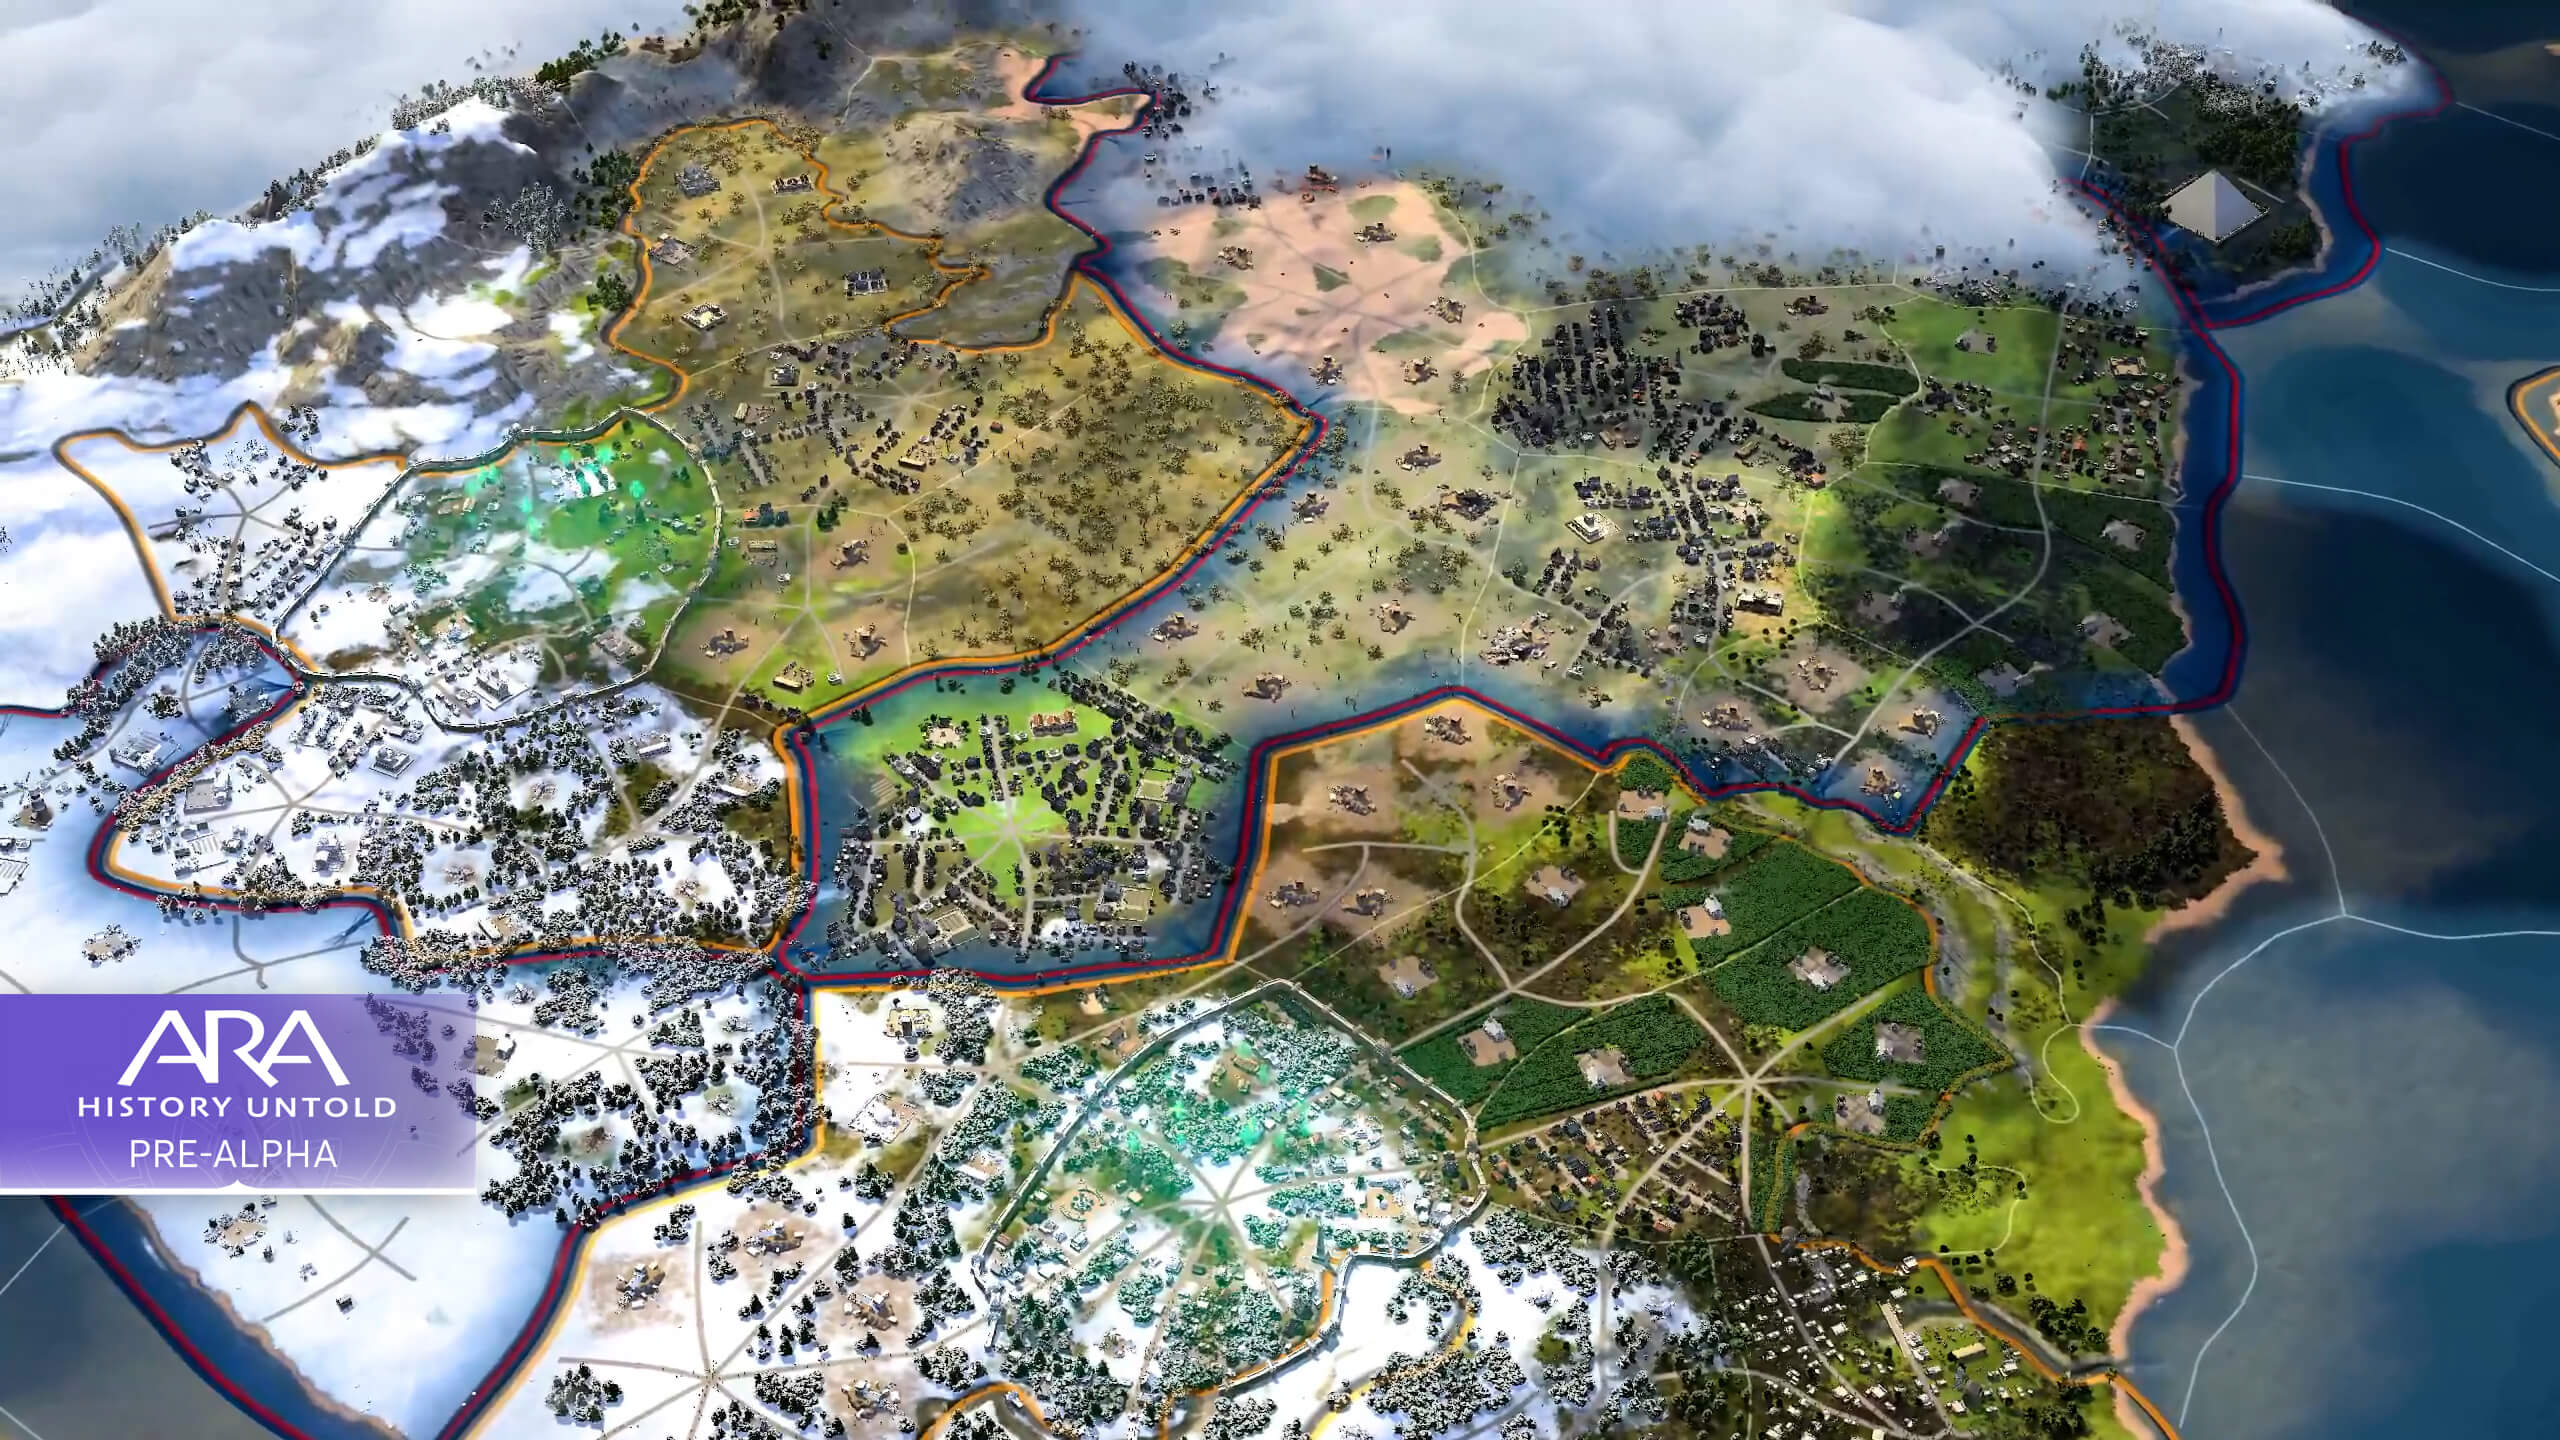 A screenshot of Ara: History Untold of the various terrains from a zoomed out view.